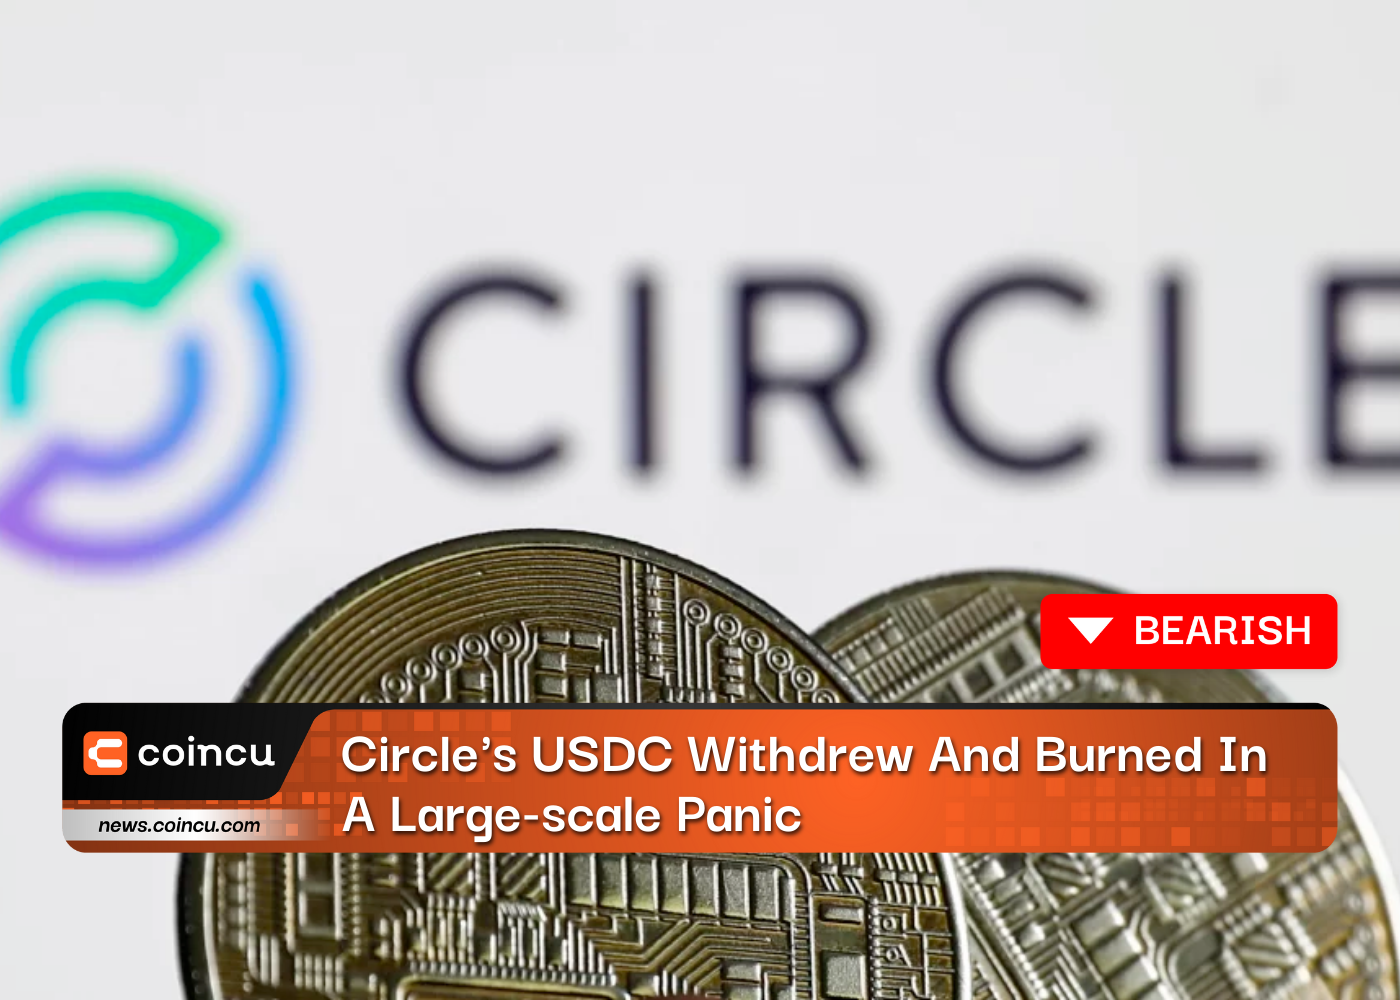 Circle's USDC Withdrew And Burned In A Large-scale Panic